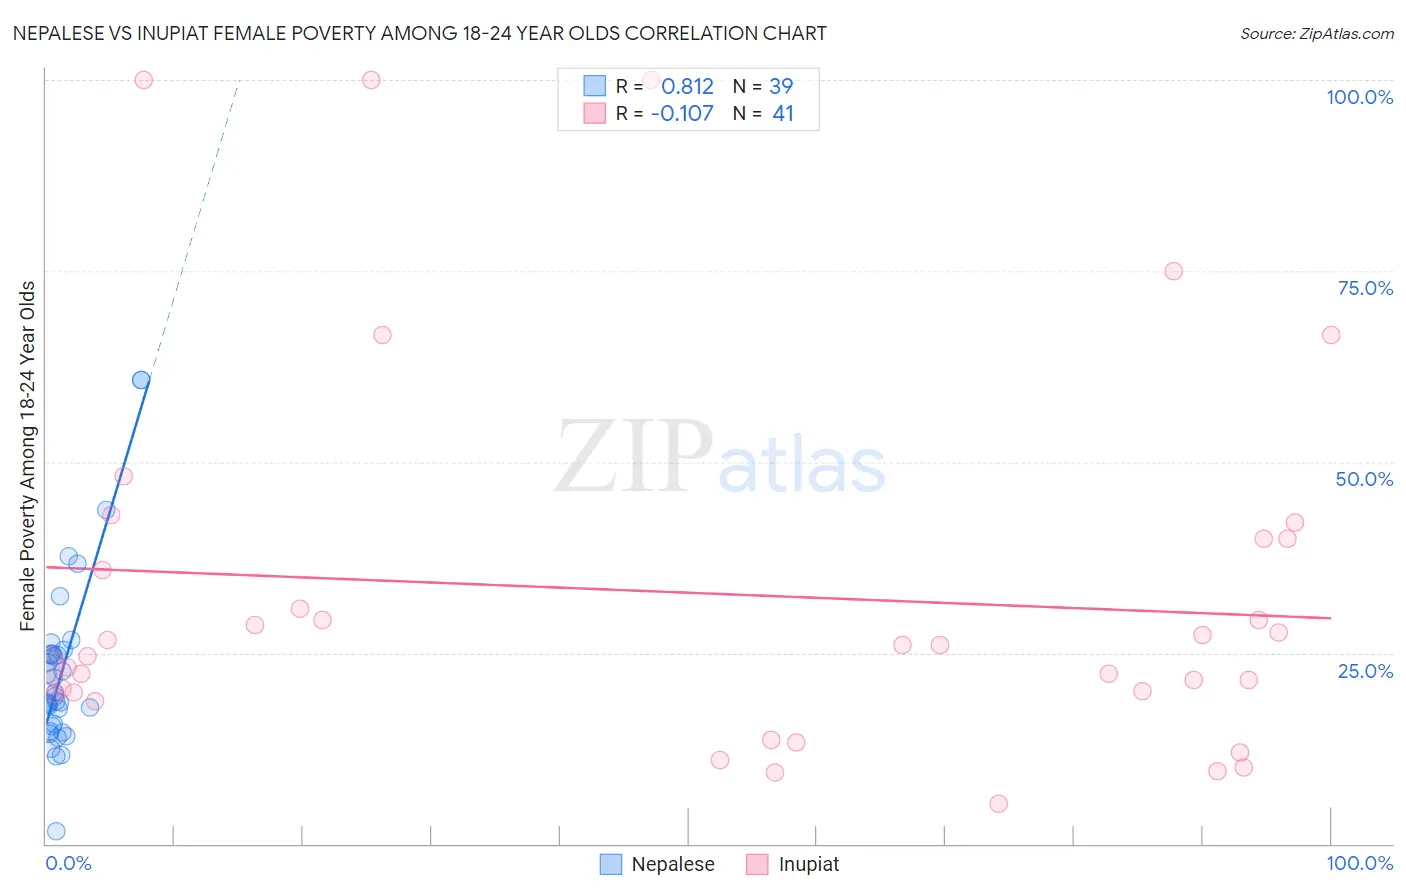 Nepalese vs Inupiat Female Poverty Among 18-24 Year Olds